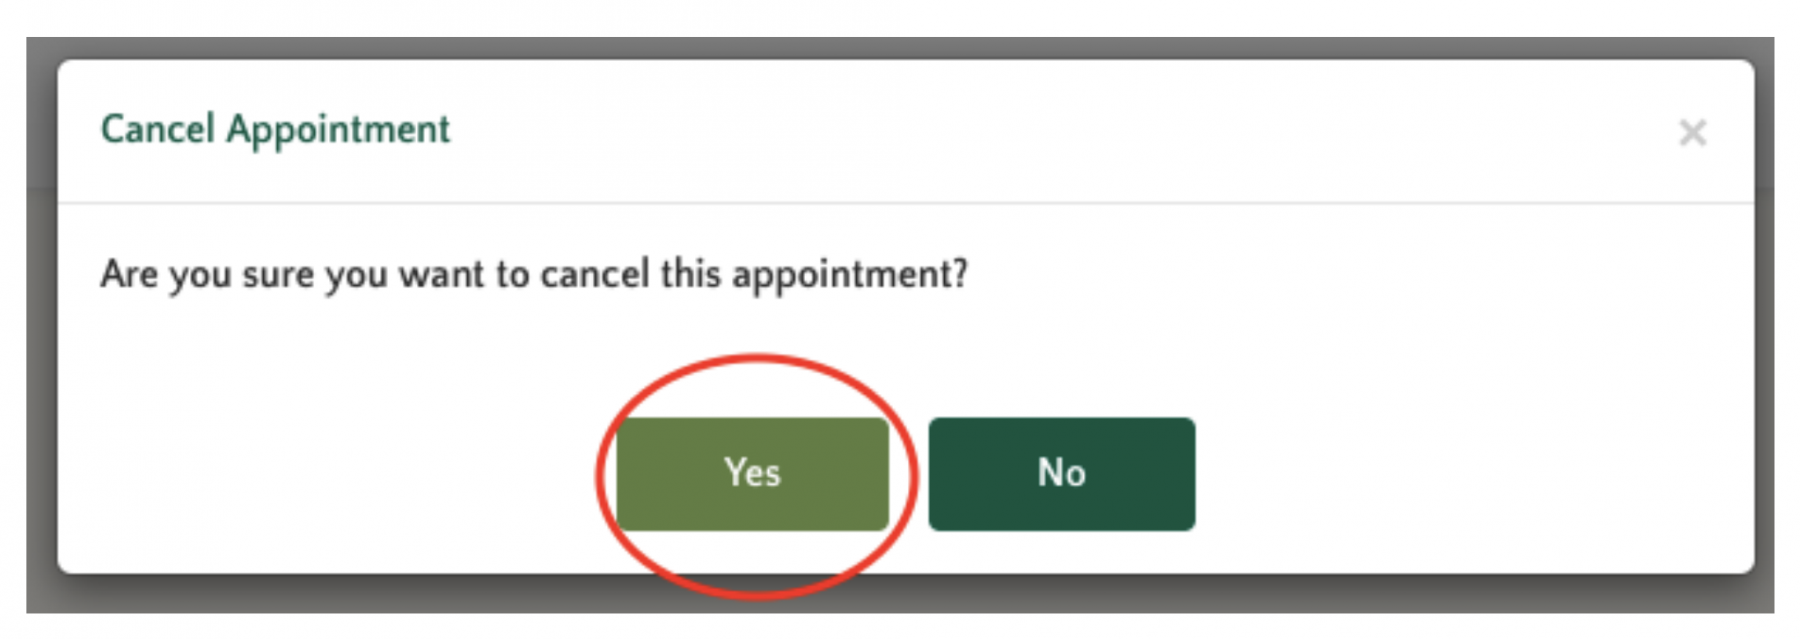 STEP 5 - A	notice	will	come	up	on	your	screen	asking	if	you	are	sure	you	would	like	to	cancel.	Choose “Yes”